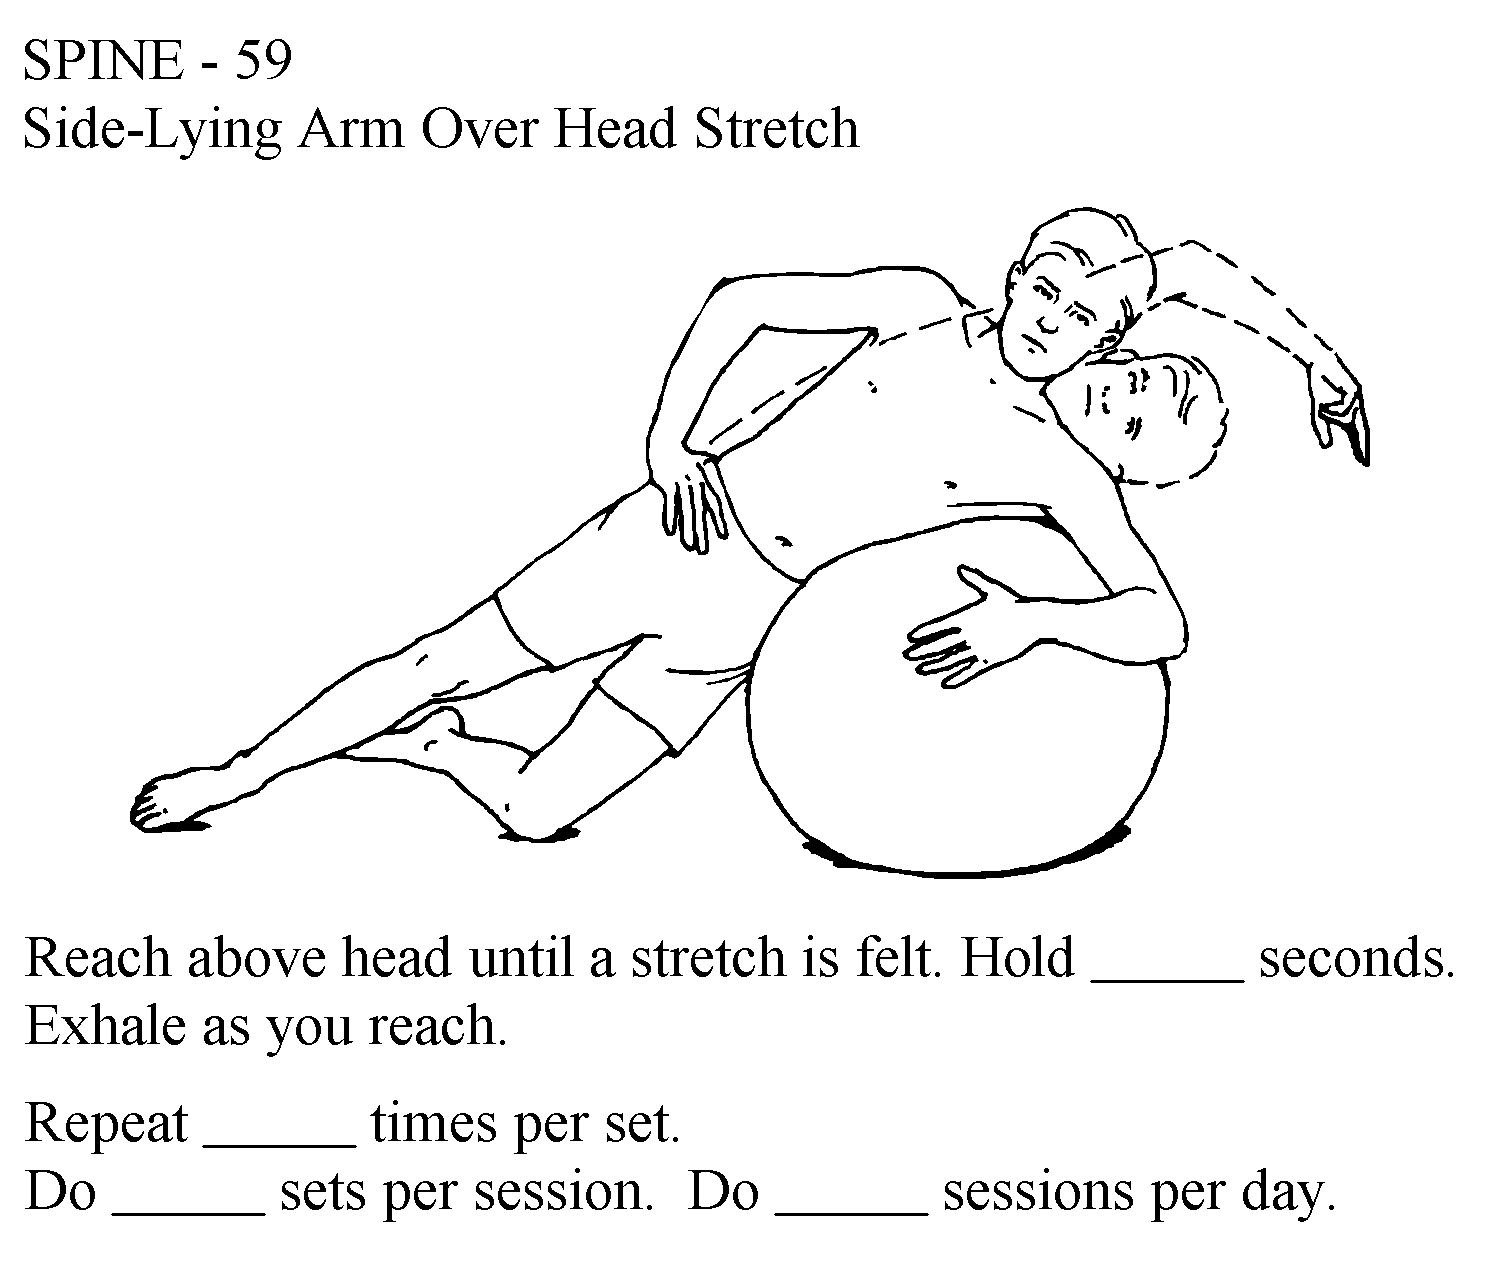 Man is sidebending over a therapy ball, raising one arm overhead to lengthen the lateral thoracolumar structures